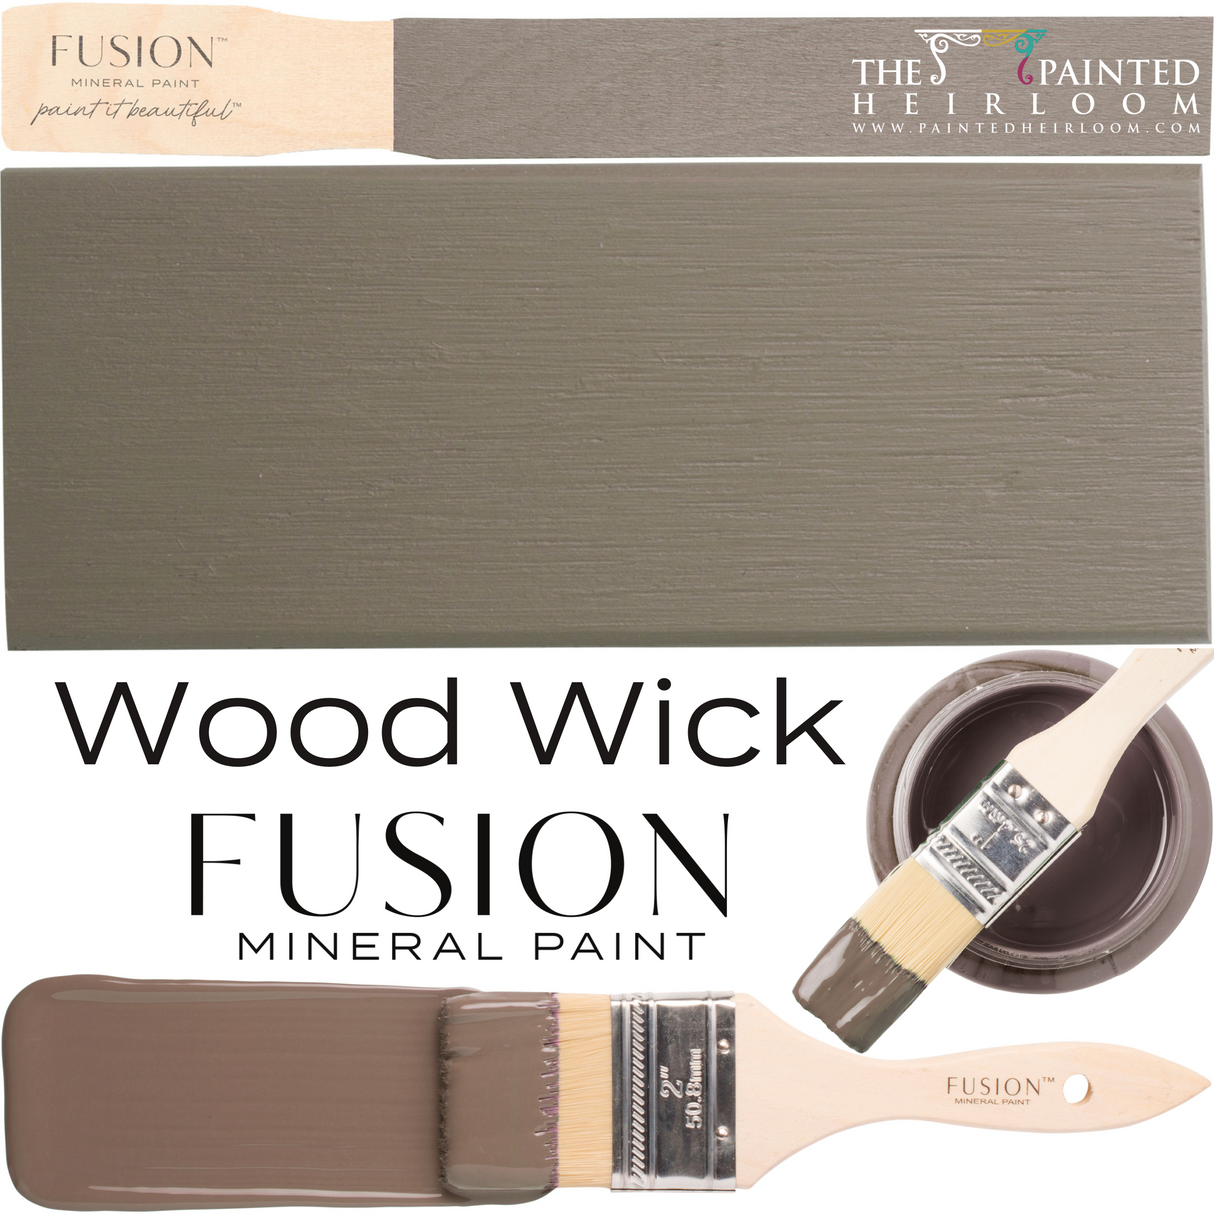 Wood Wick Fusion Mineral Paint - Blue Star At Home